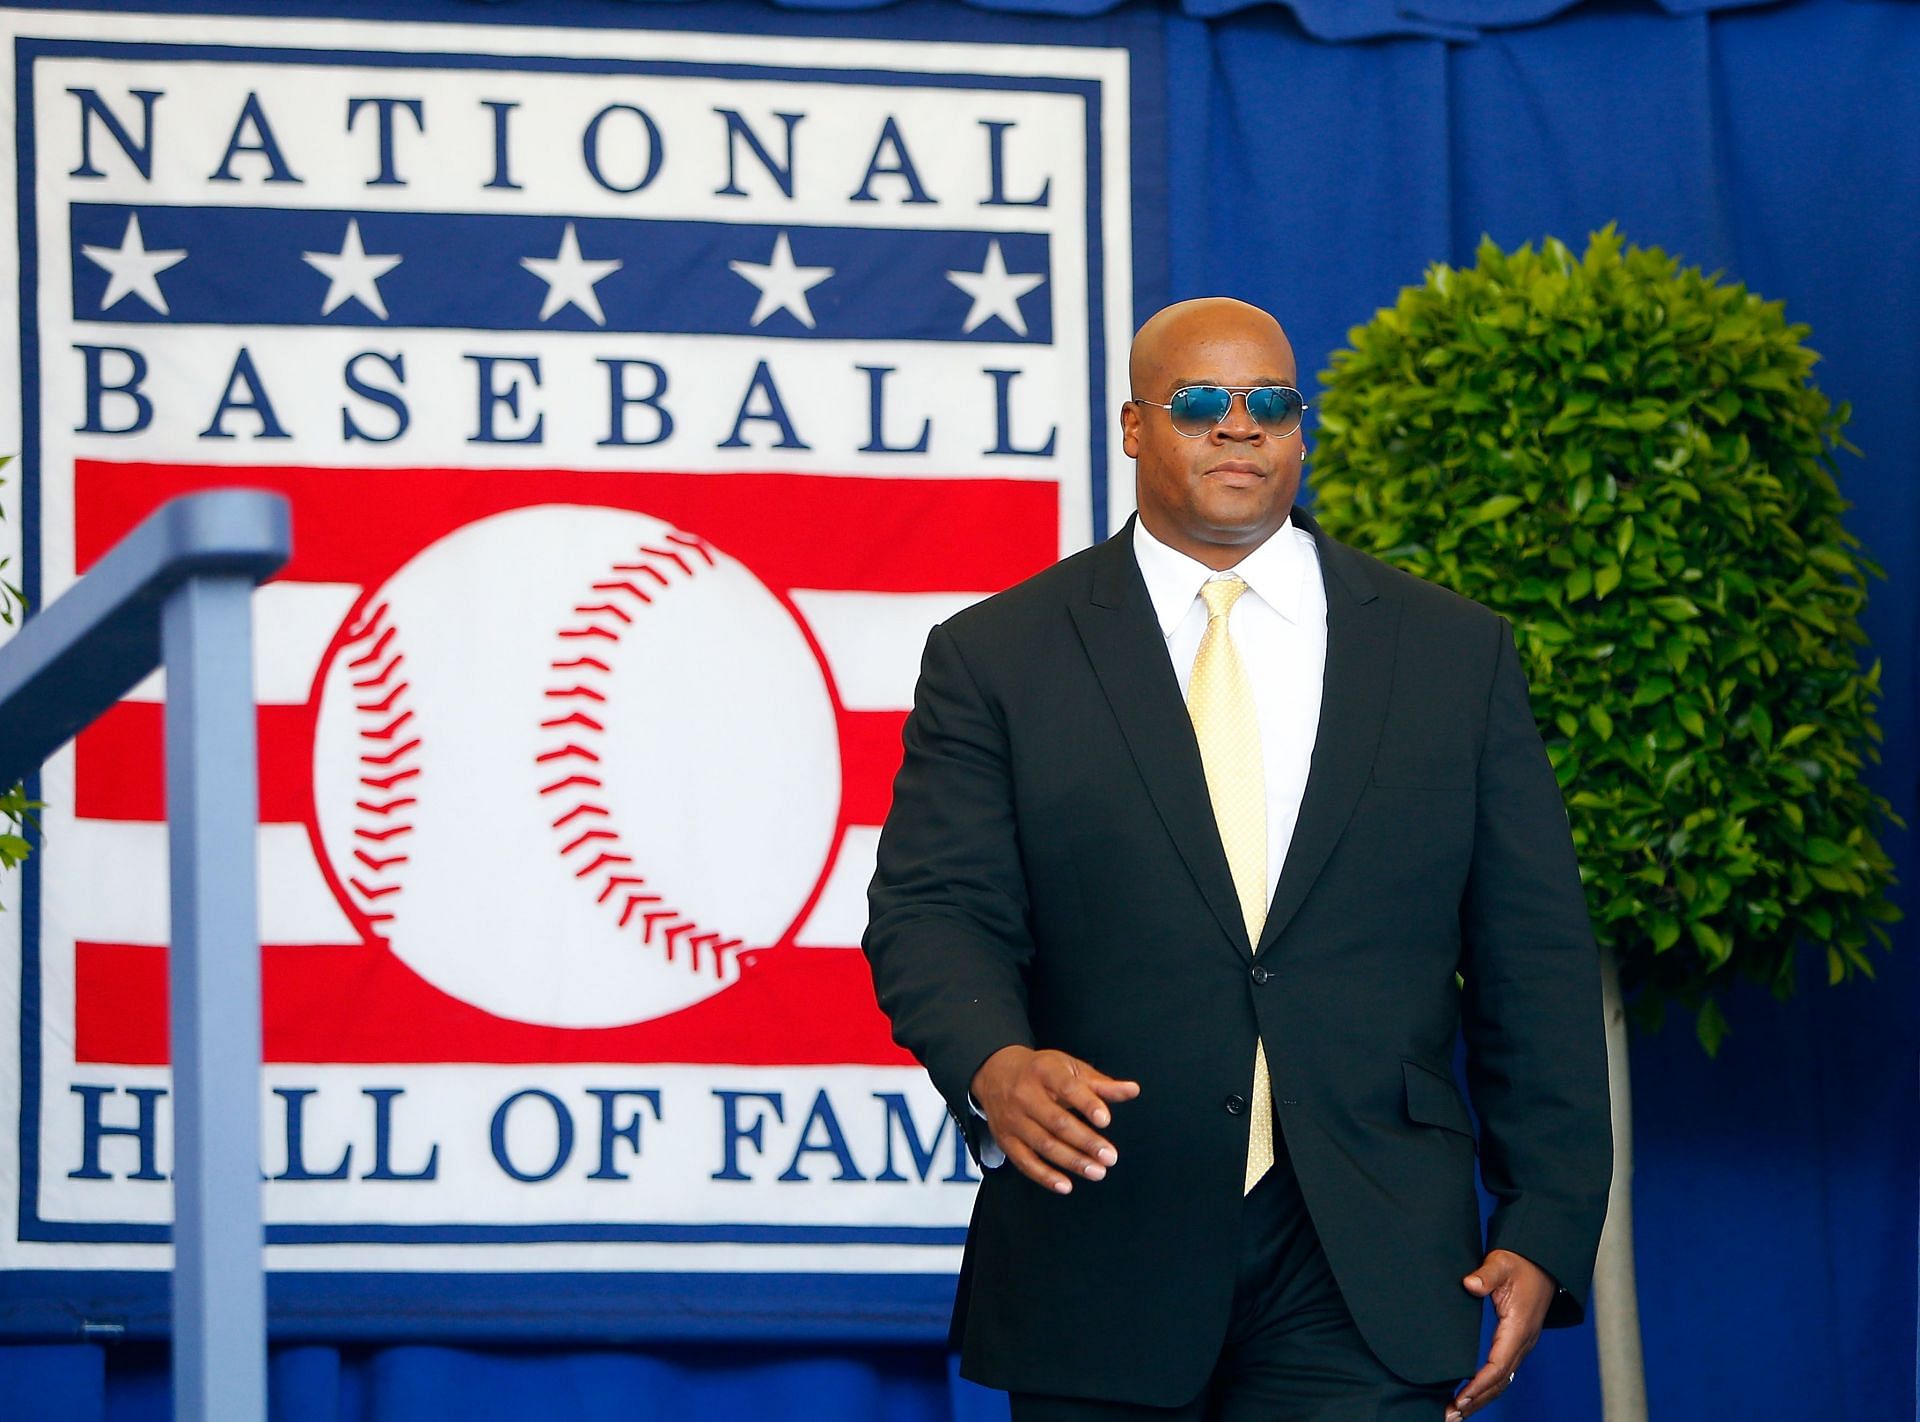 Frank Thomas called out as 'douchebag' by ex-teammate in new book